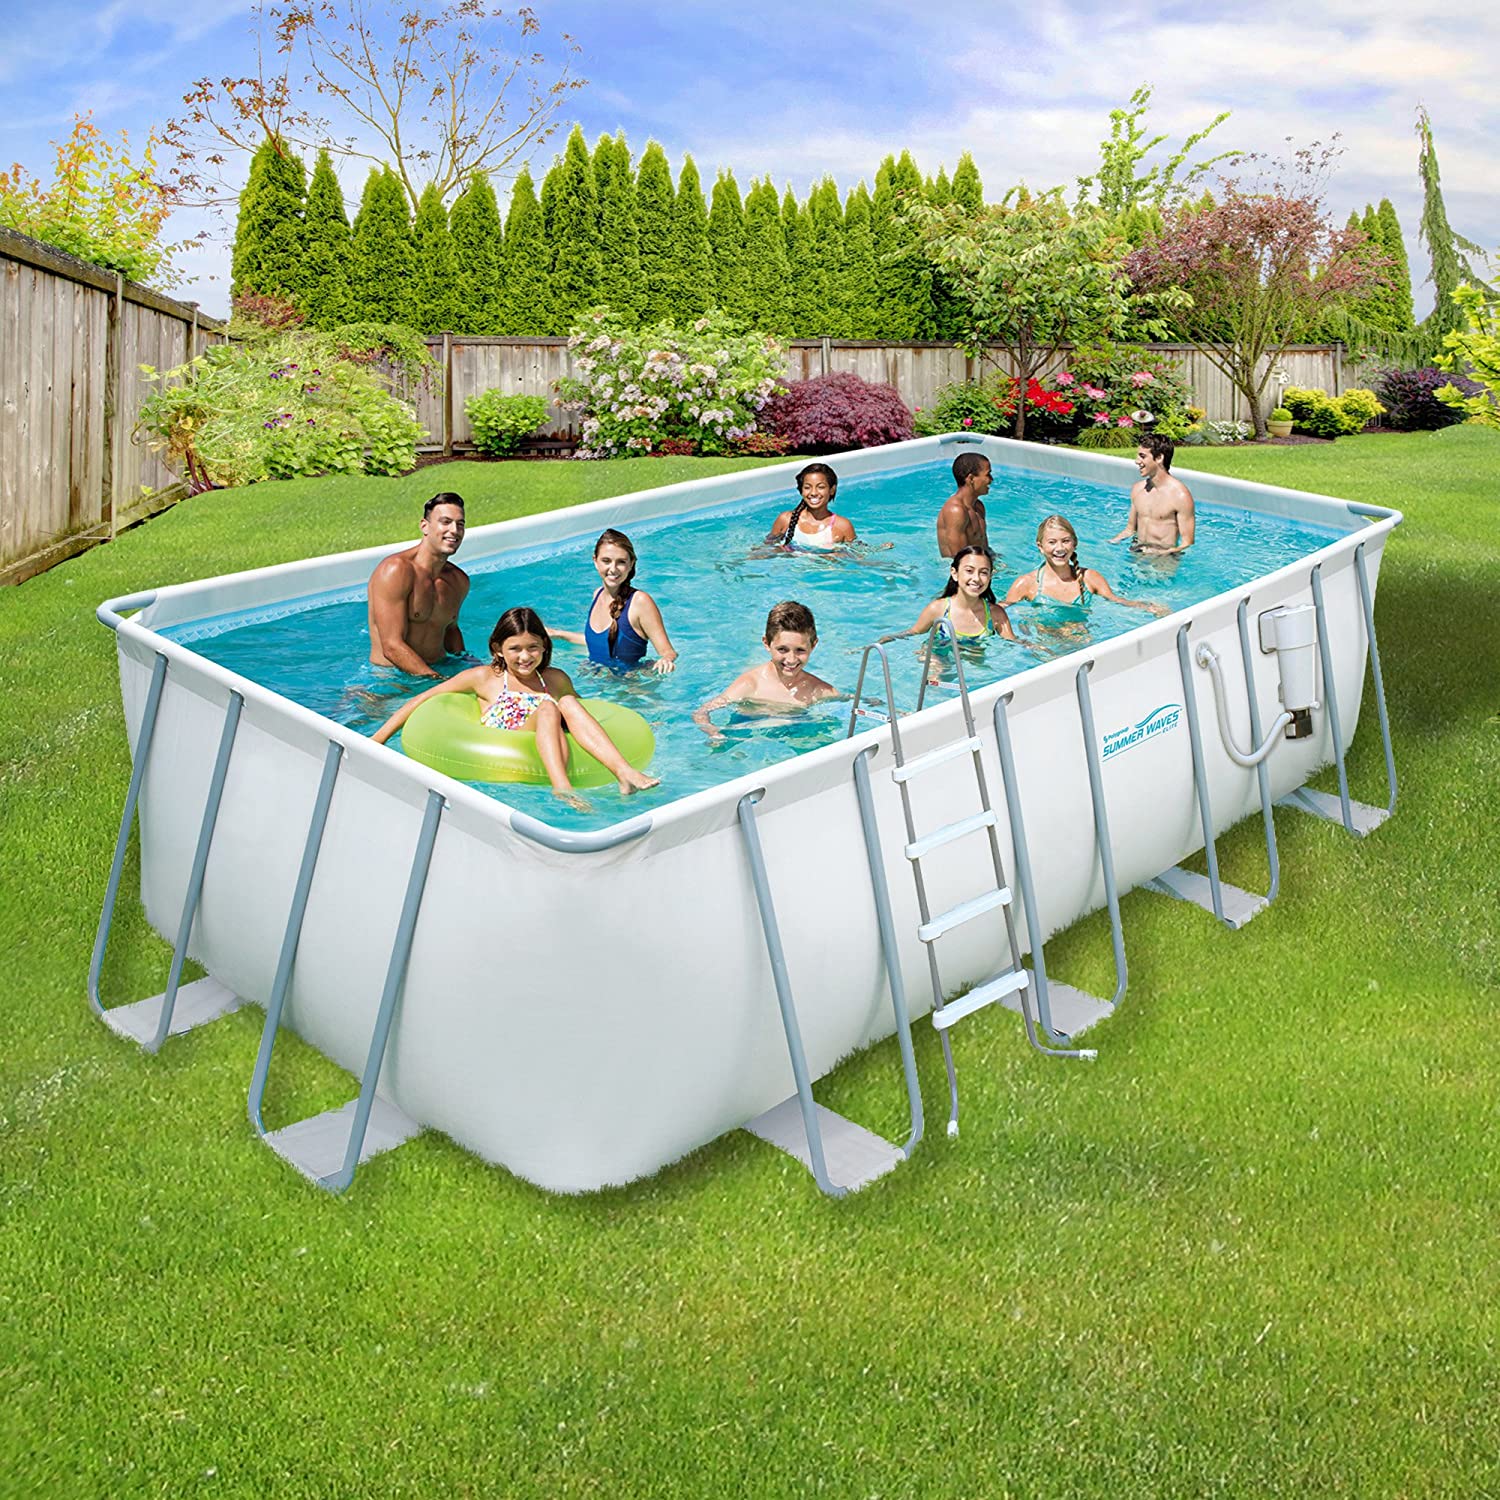 9 Best Rectangular Above Ground Pool for 2021: Expert Reviews